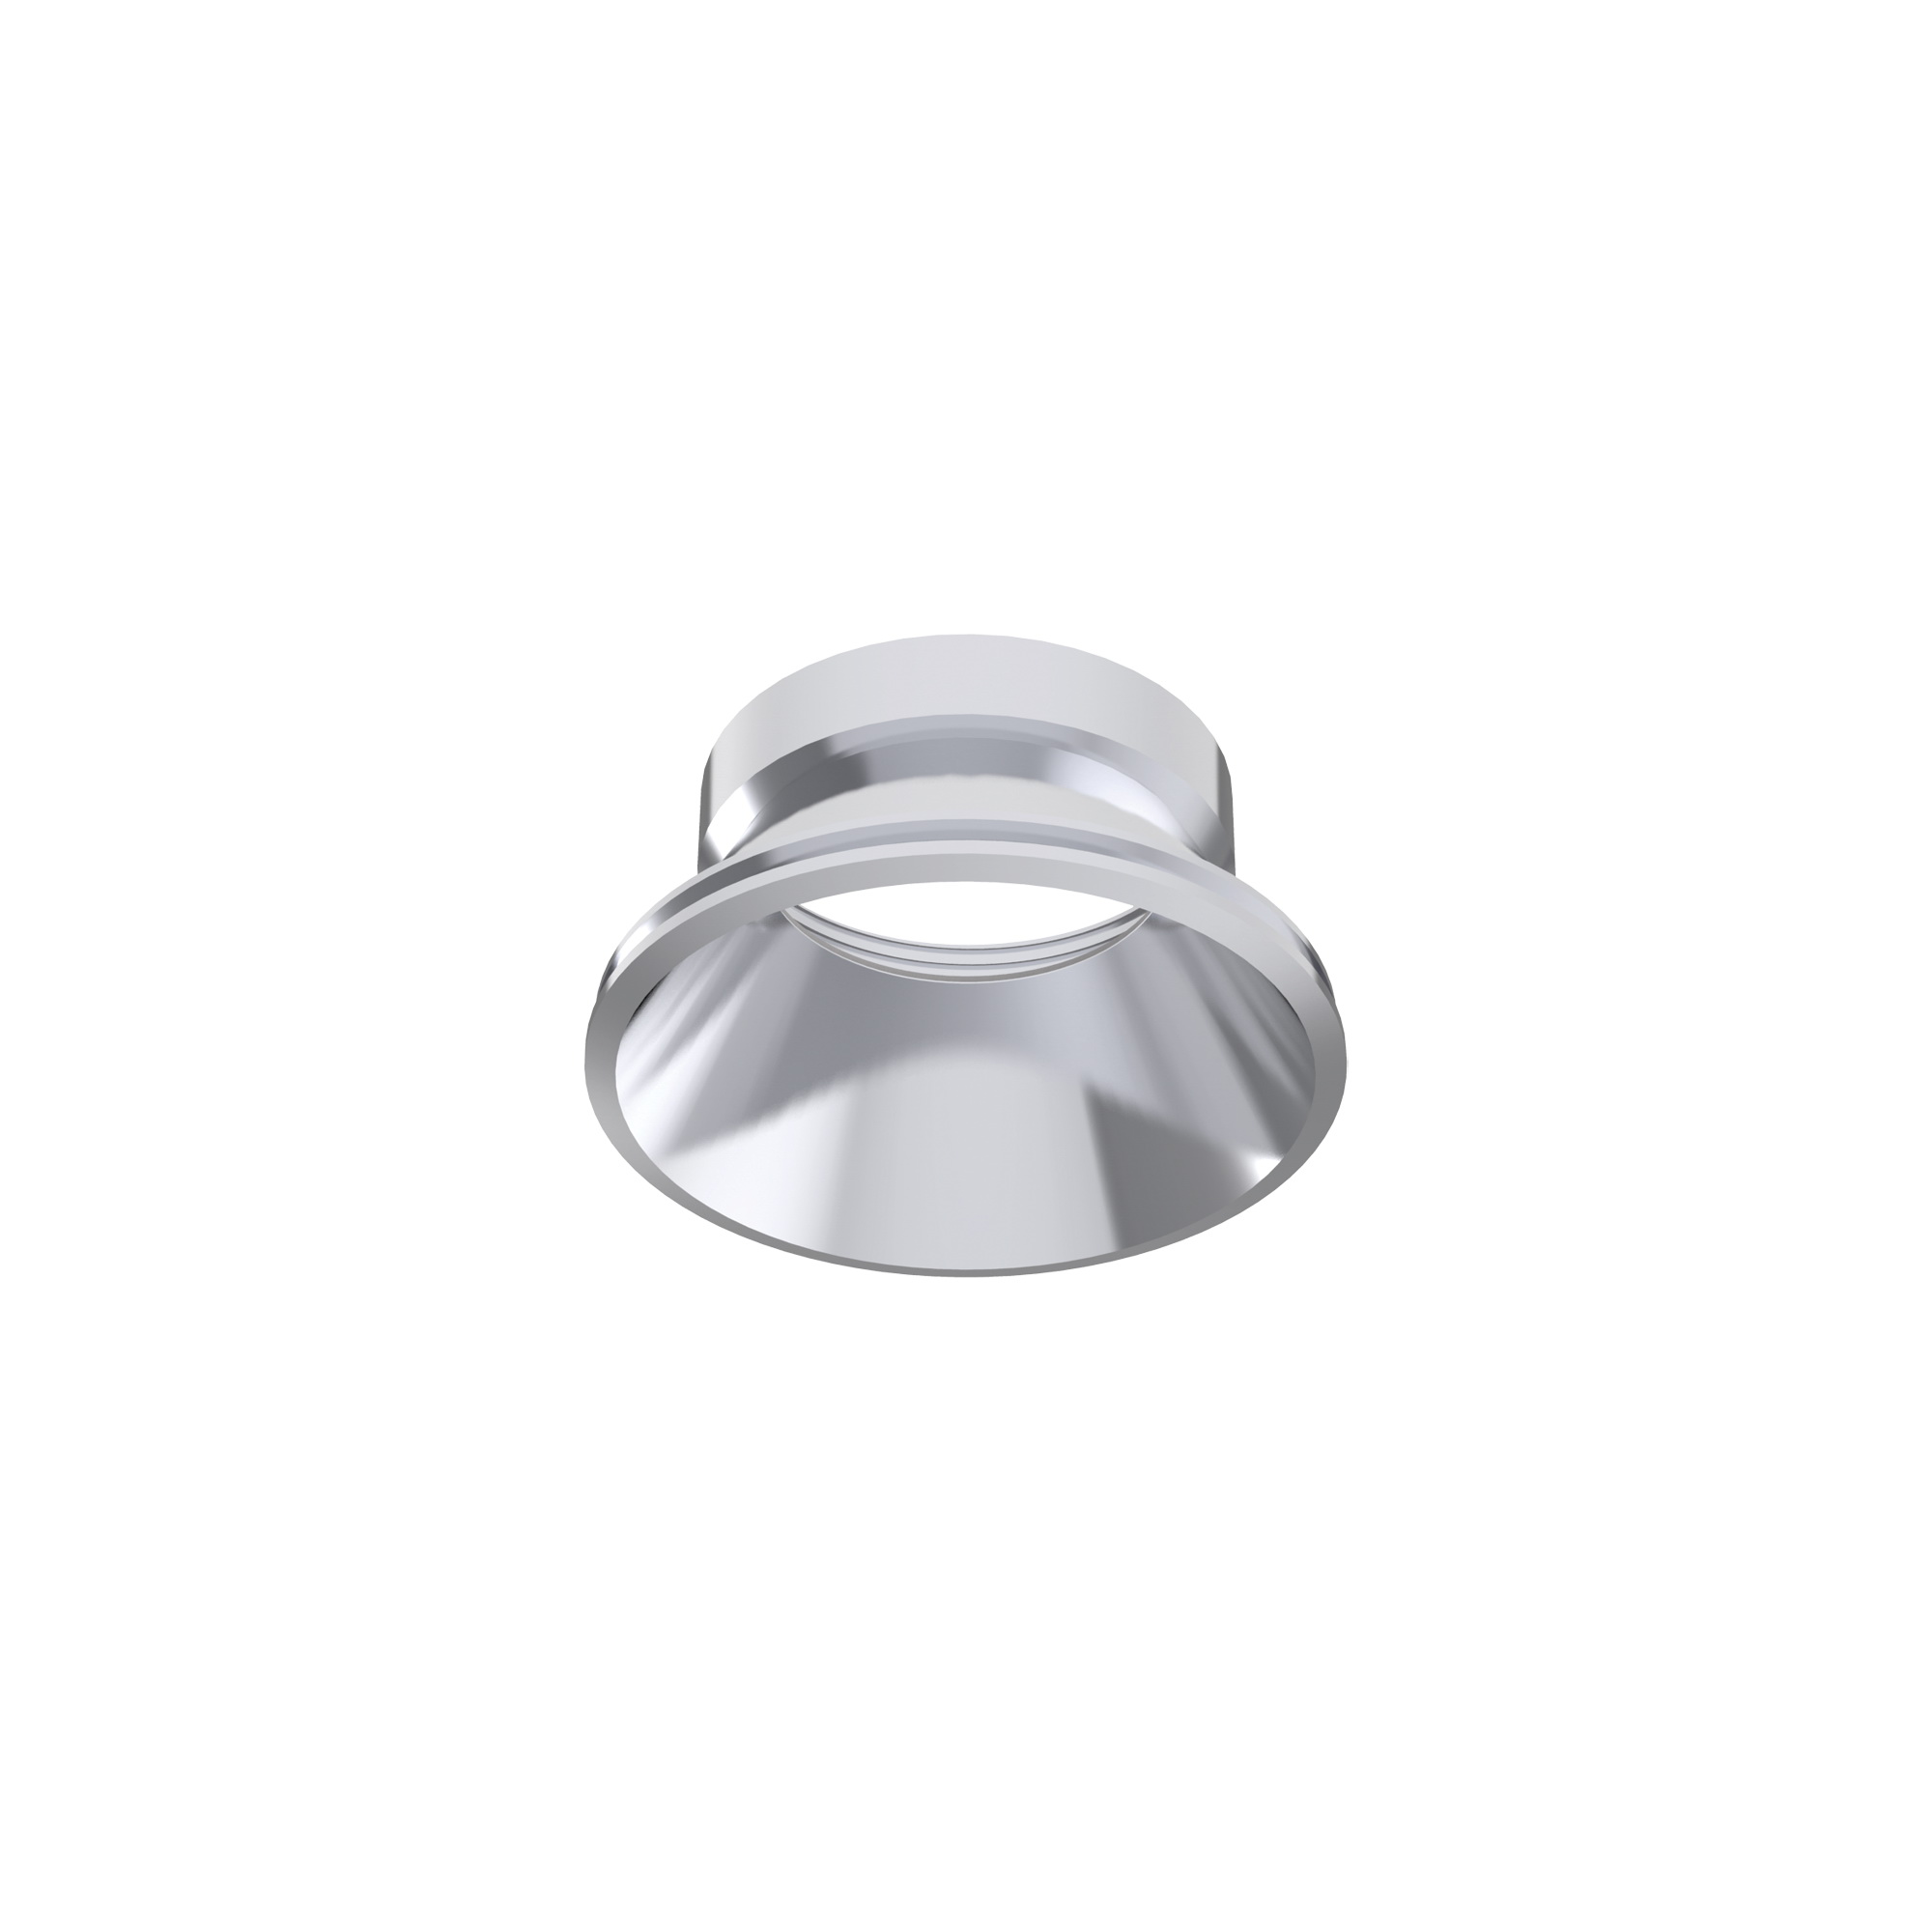 DYNAMIC REFLECTOR ROUND FIXED CHROME 